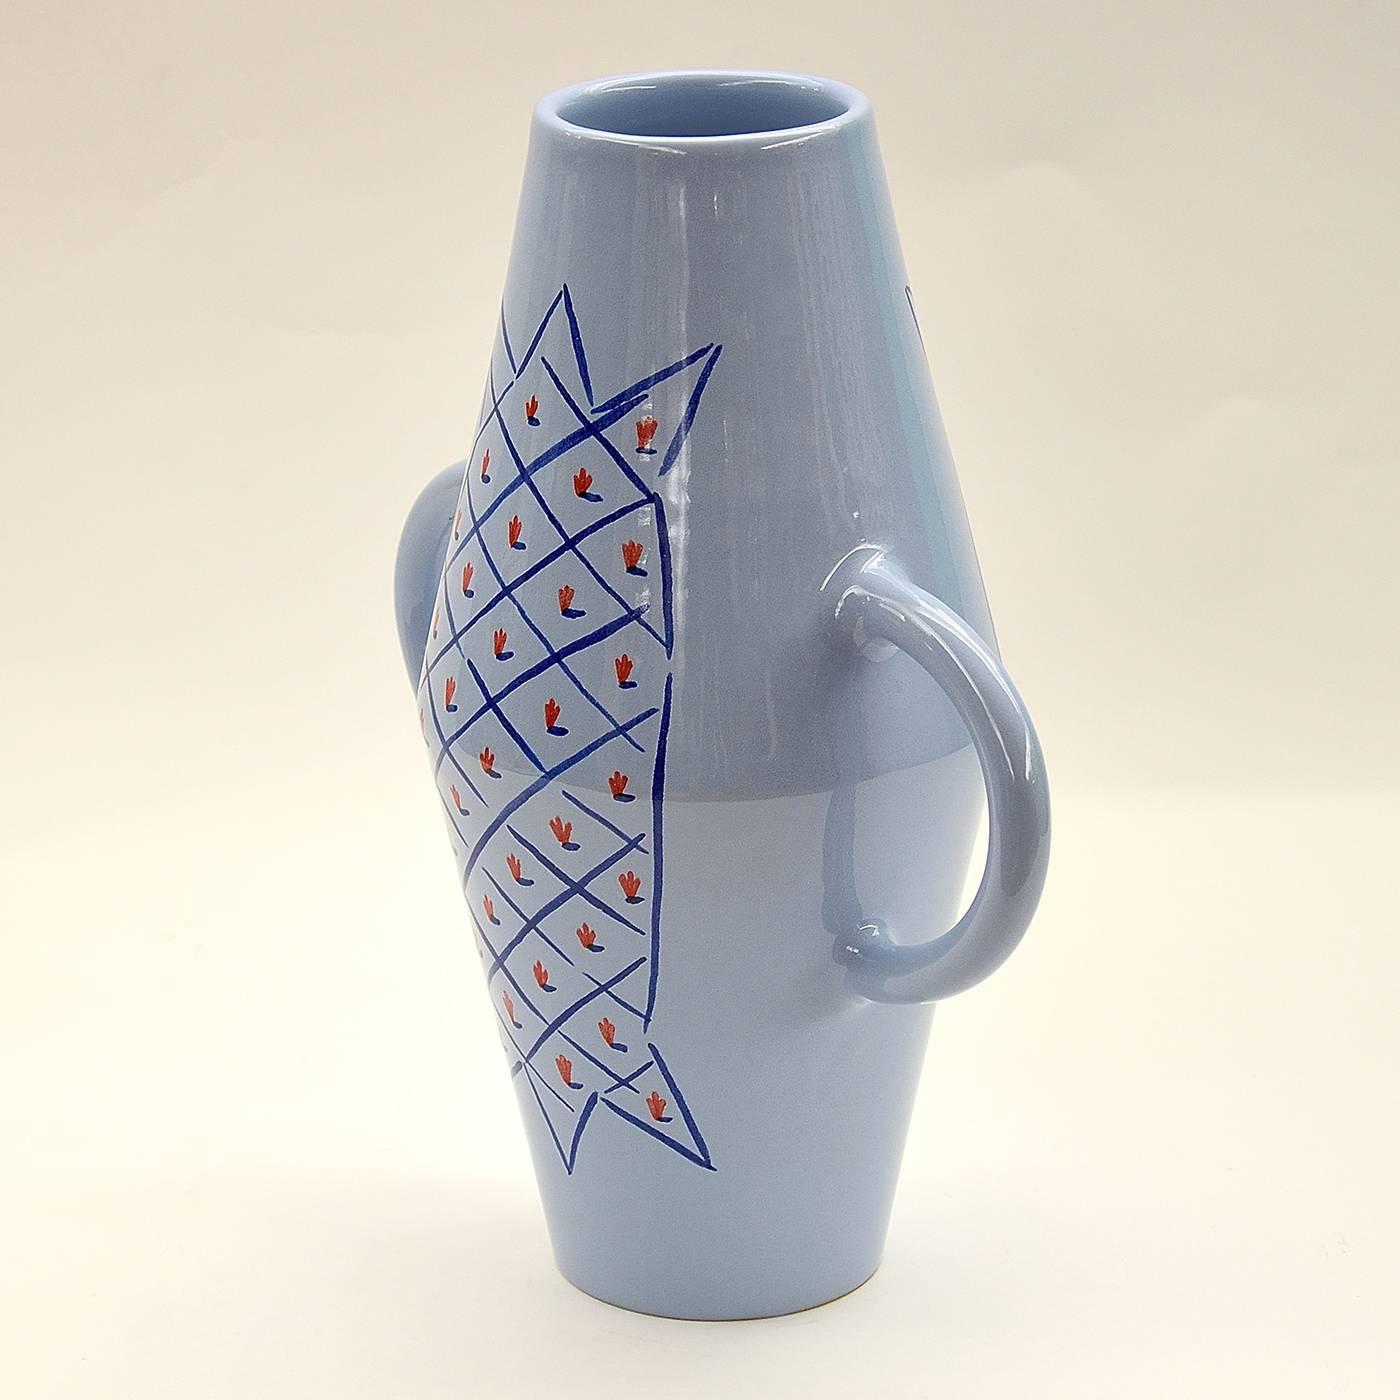 This ceramic vase with handles was made on a lathe and enameled in earthenware. It was hand-painted with a geometric pattern in blue and red over a light blue glossy base. This piece is one in a limited series of six crafted by Ugo La Pietra.